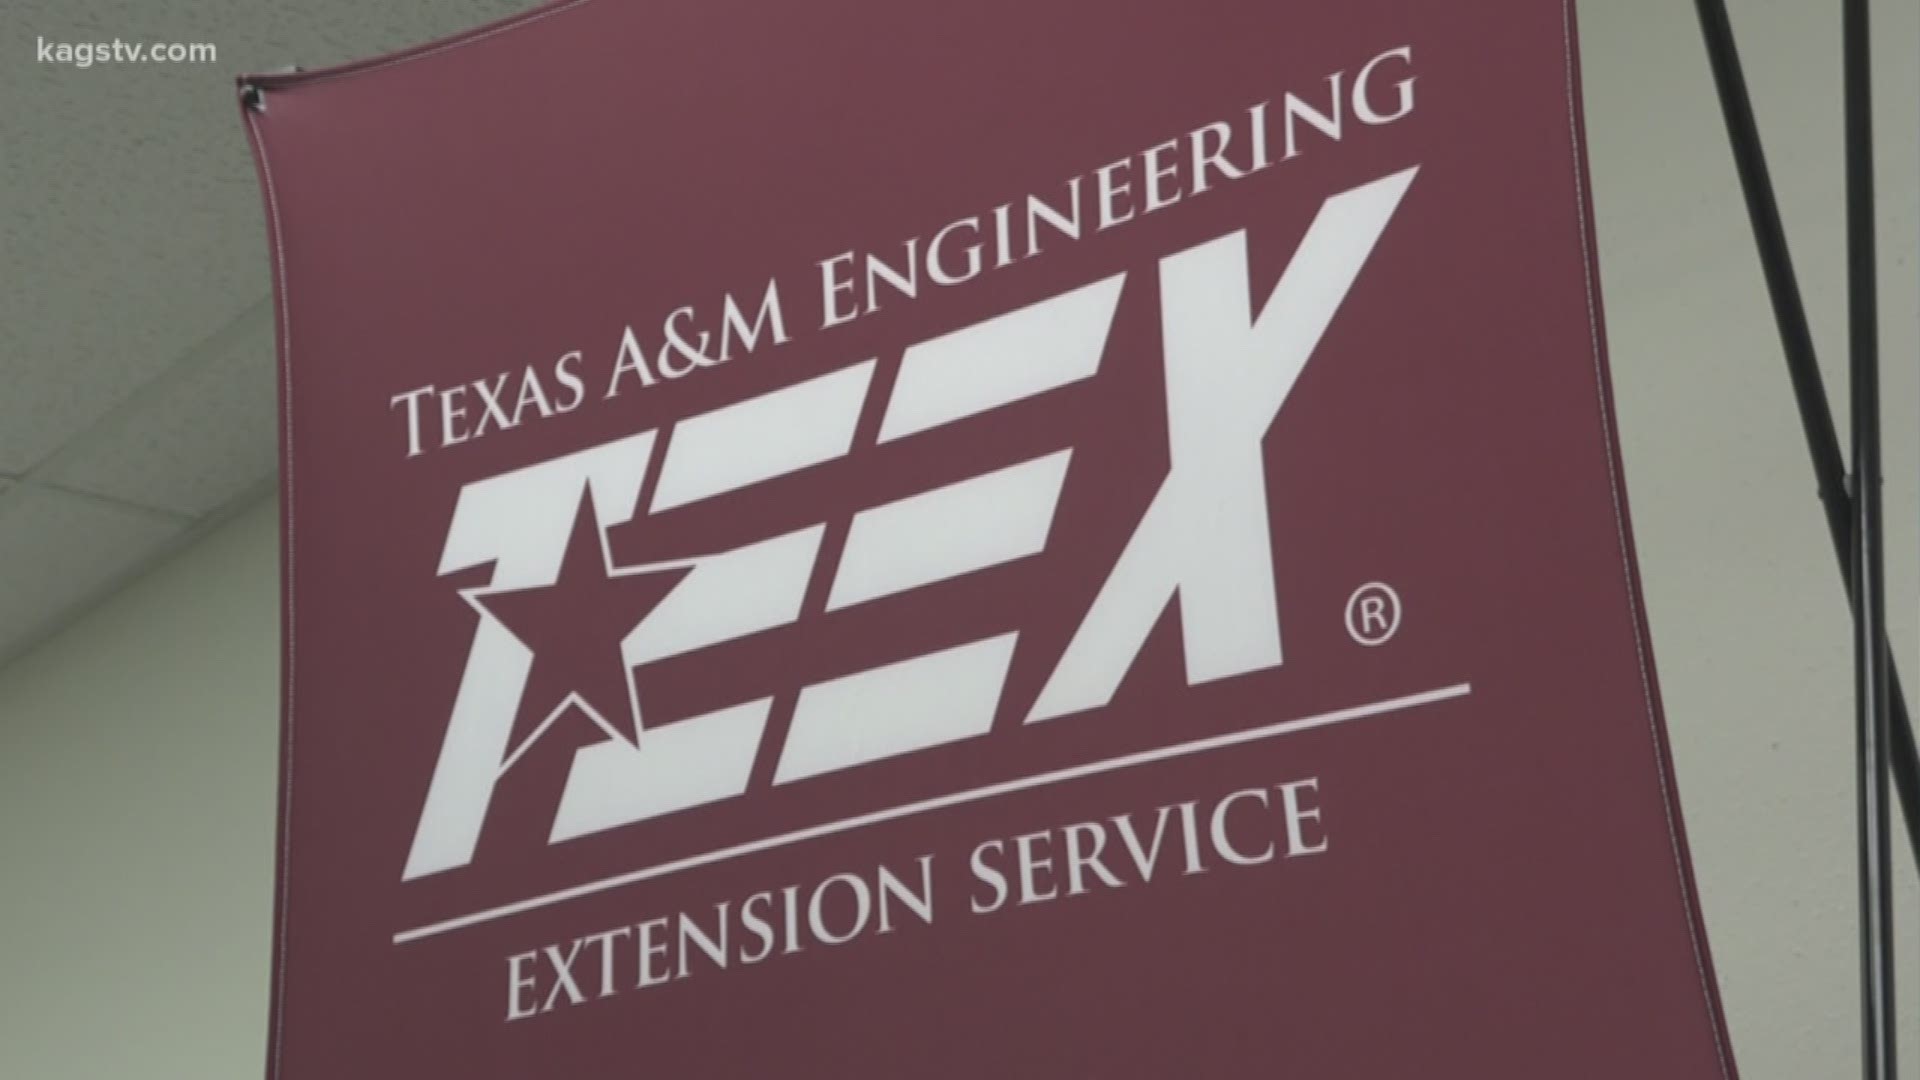 TEEX has trained more than 26,000 law enforcement officers and crime scene investigators.